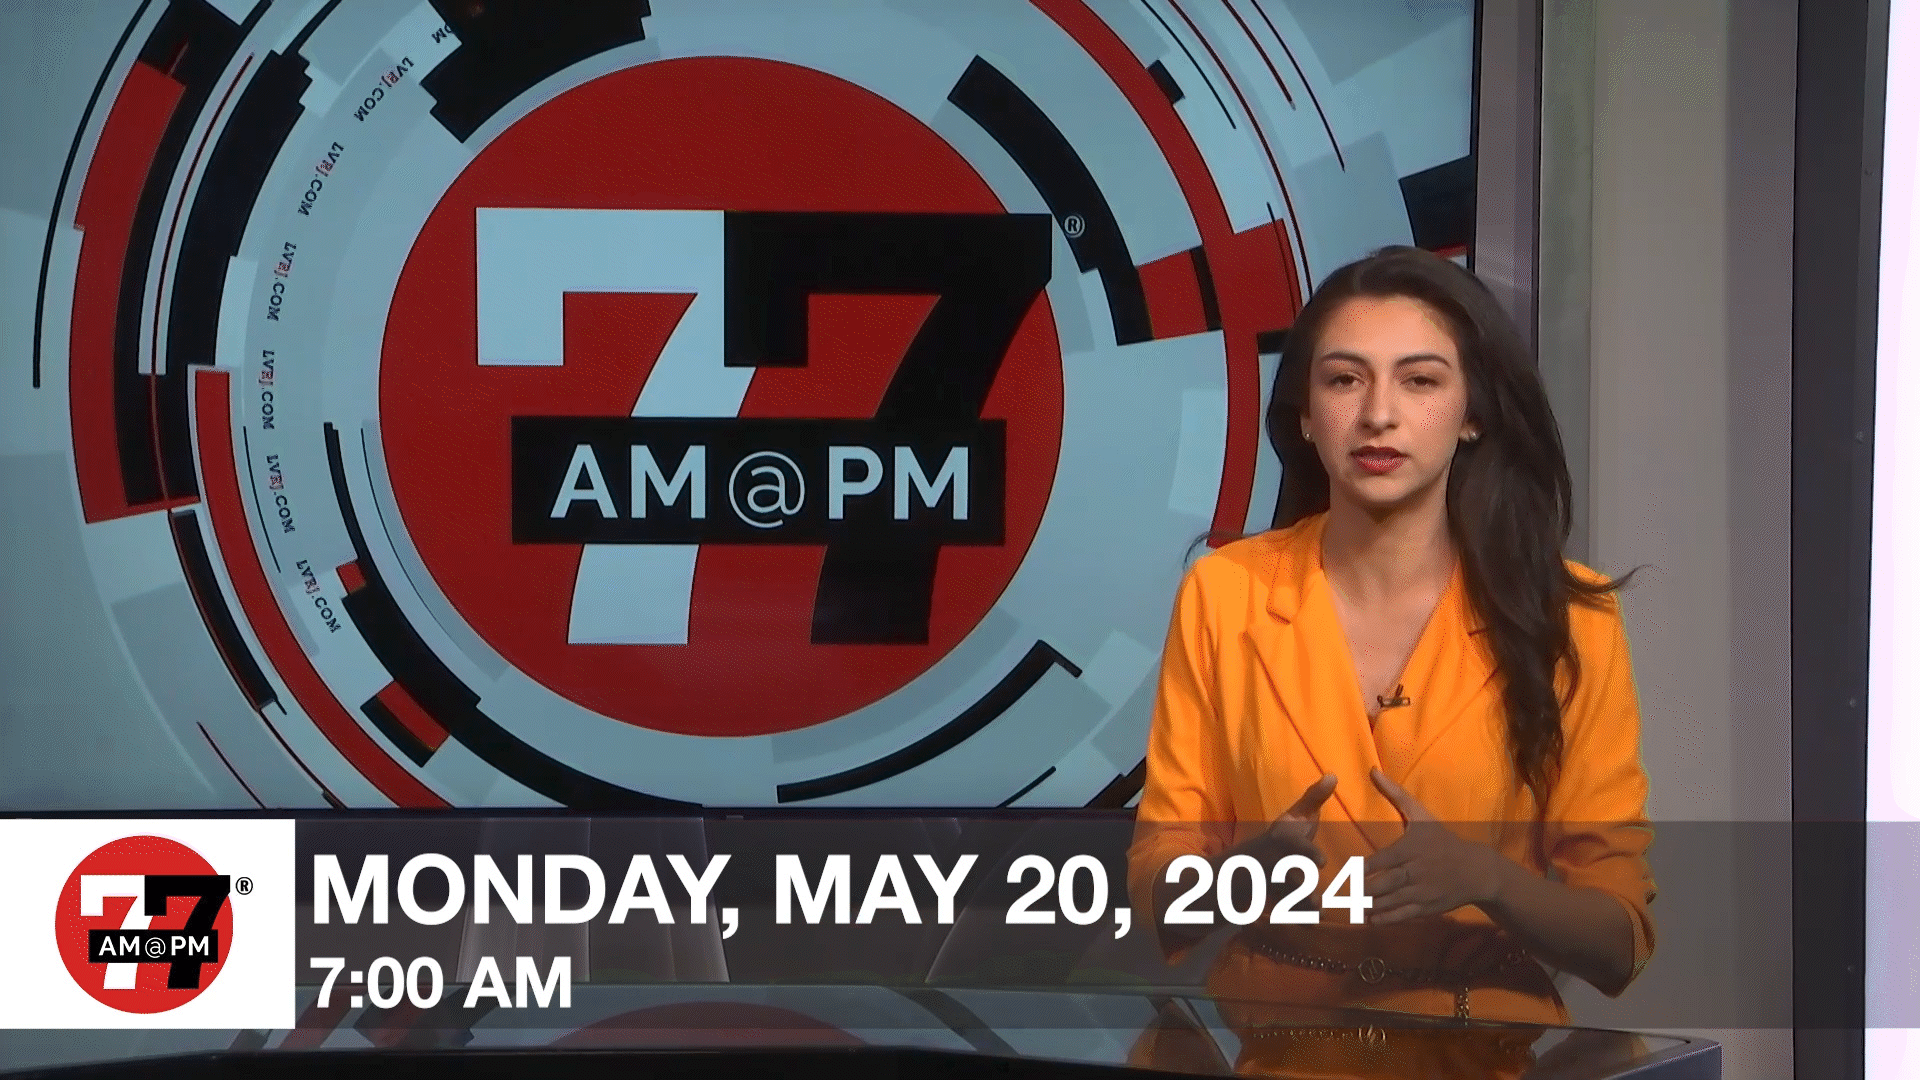 7@7 AM for Monday, May 20, 2024